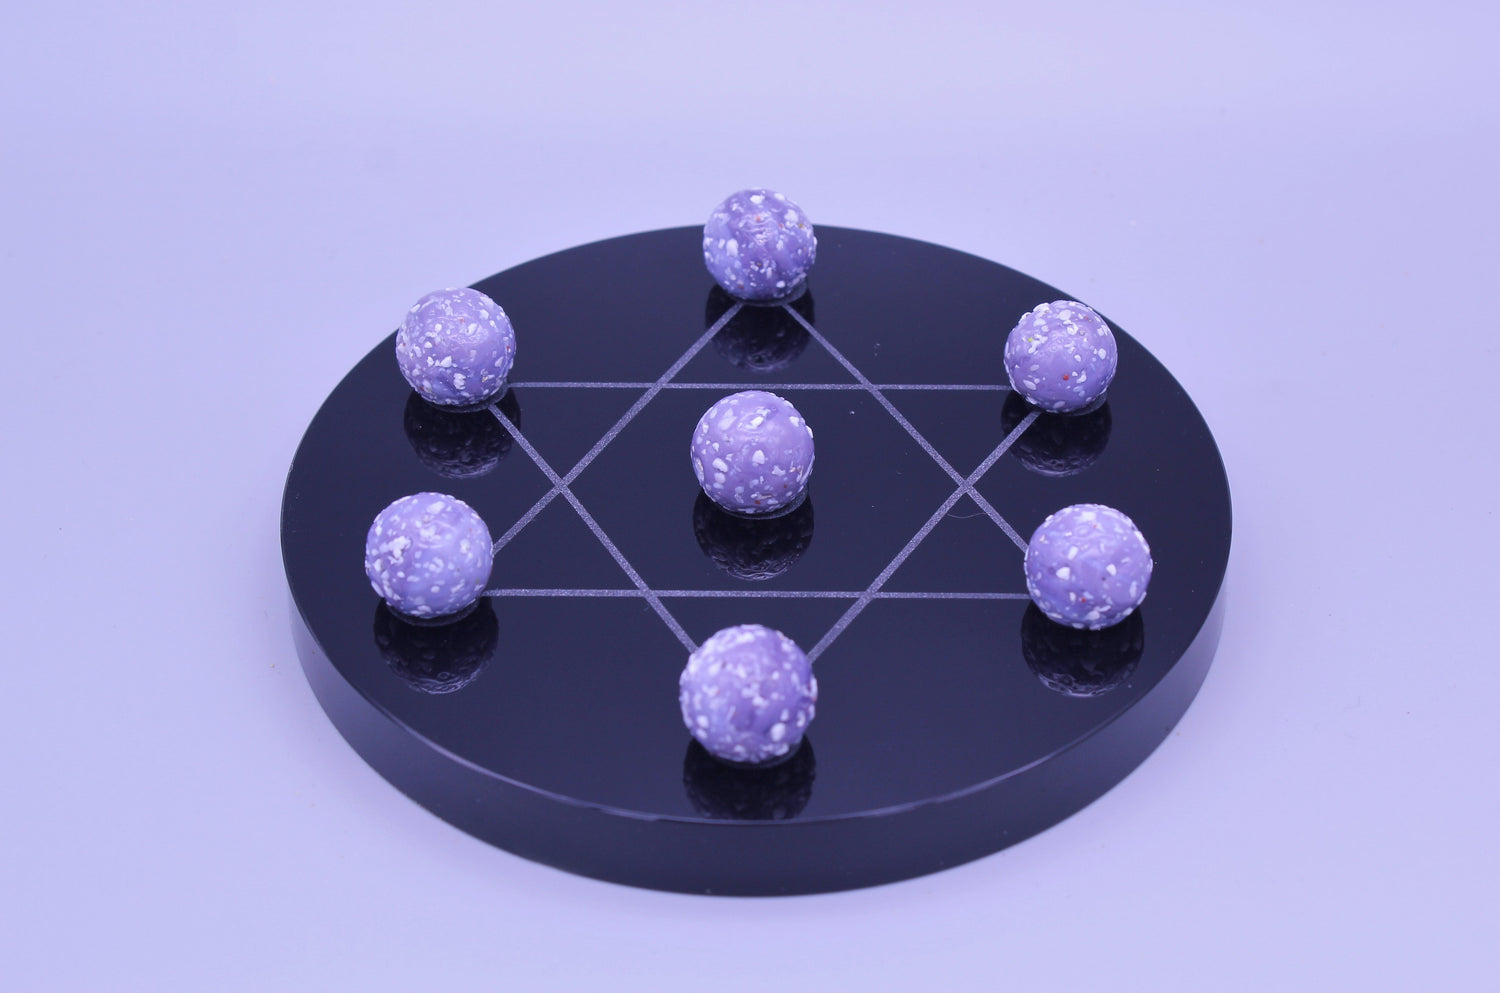 Six Pointed Star Sphere Display Dish with Marbles